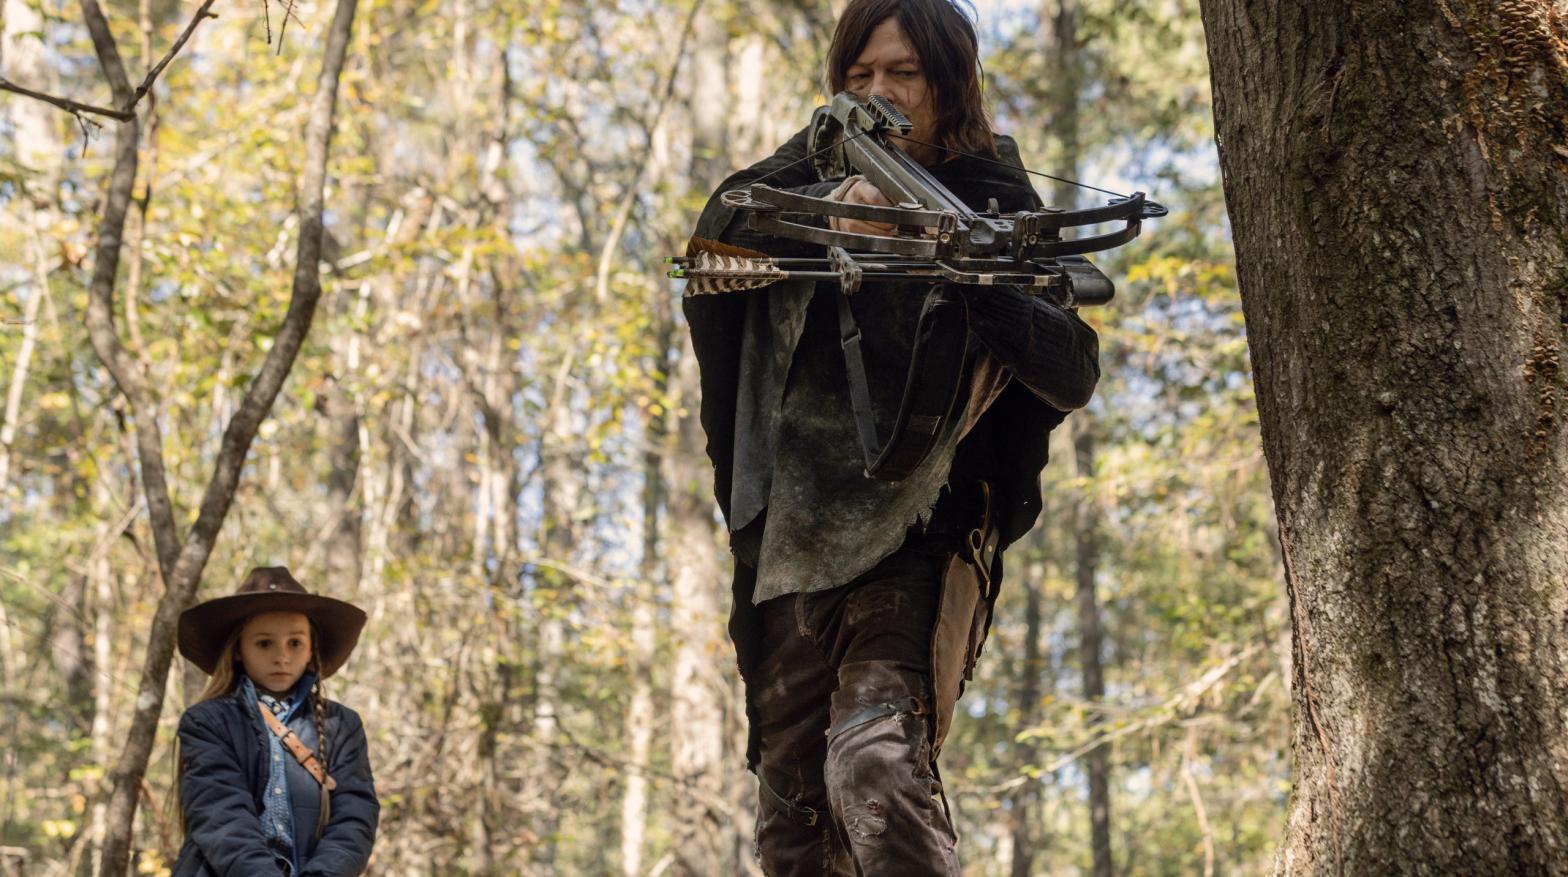 A scene from AMC's The Walking Dead, which is coming to an end in 2022.  (Image: Jackson Lee Davis/AMC)